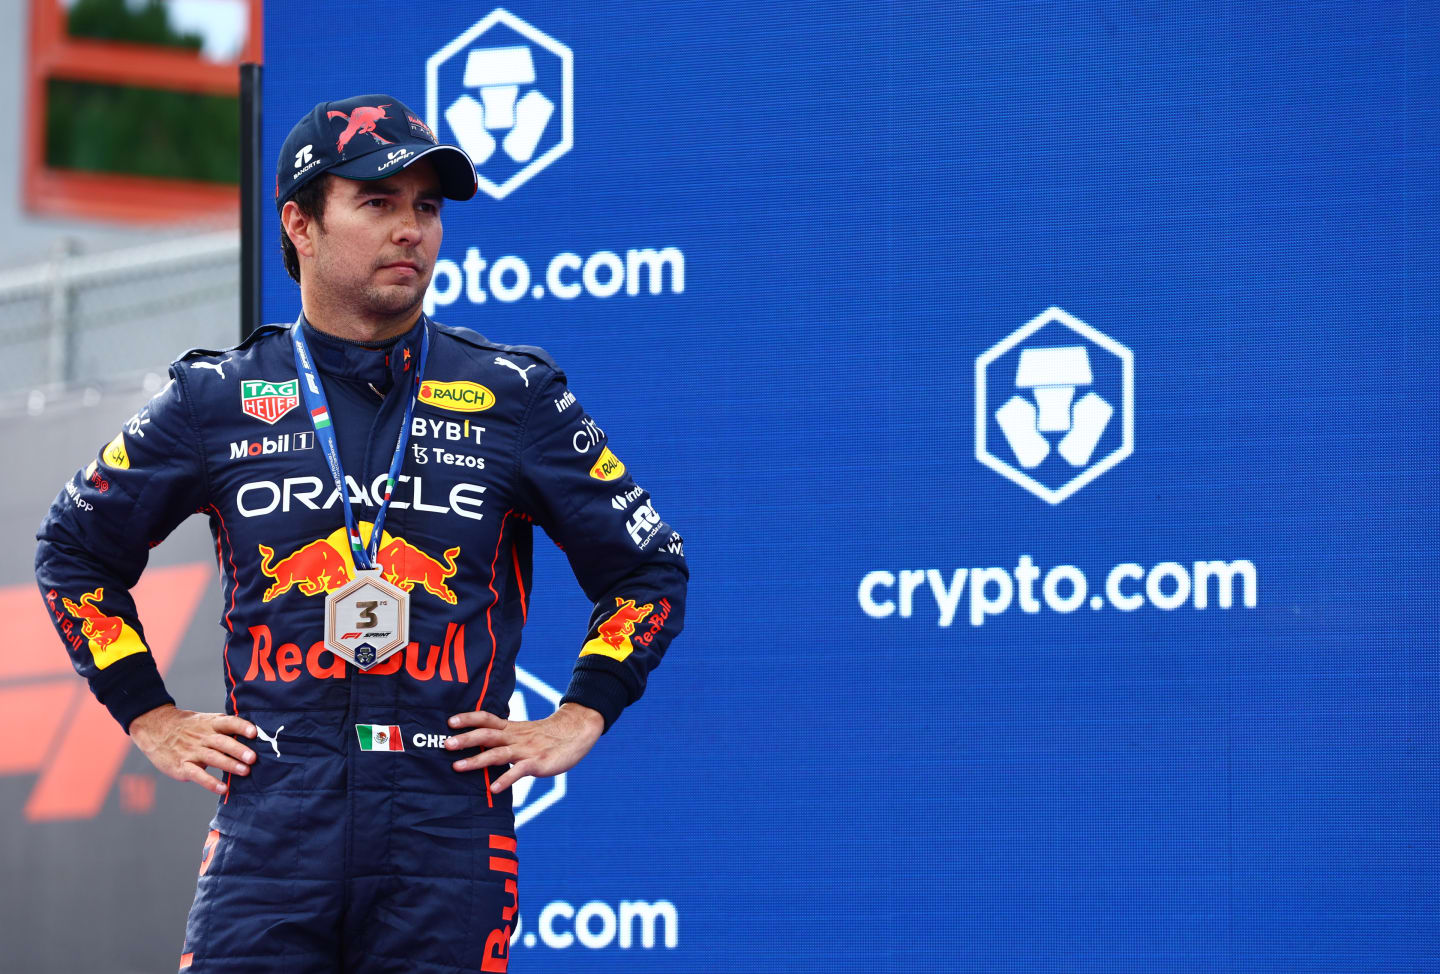 IMOLA, ITALY - APRIL 23: Third placed Sergio Perez of Mexico and Oracle Red Bull Racing looks on at the Sprint Victory Ceremony during Sprint ahead of the F1 Grand Prix of Emilia Romagna at Autodromo Enzo e Dino Ferrari on April 23, 2022 in Imola, Italy. (Photo by Mark Thompson/Getty Images)